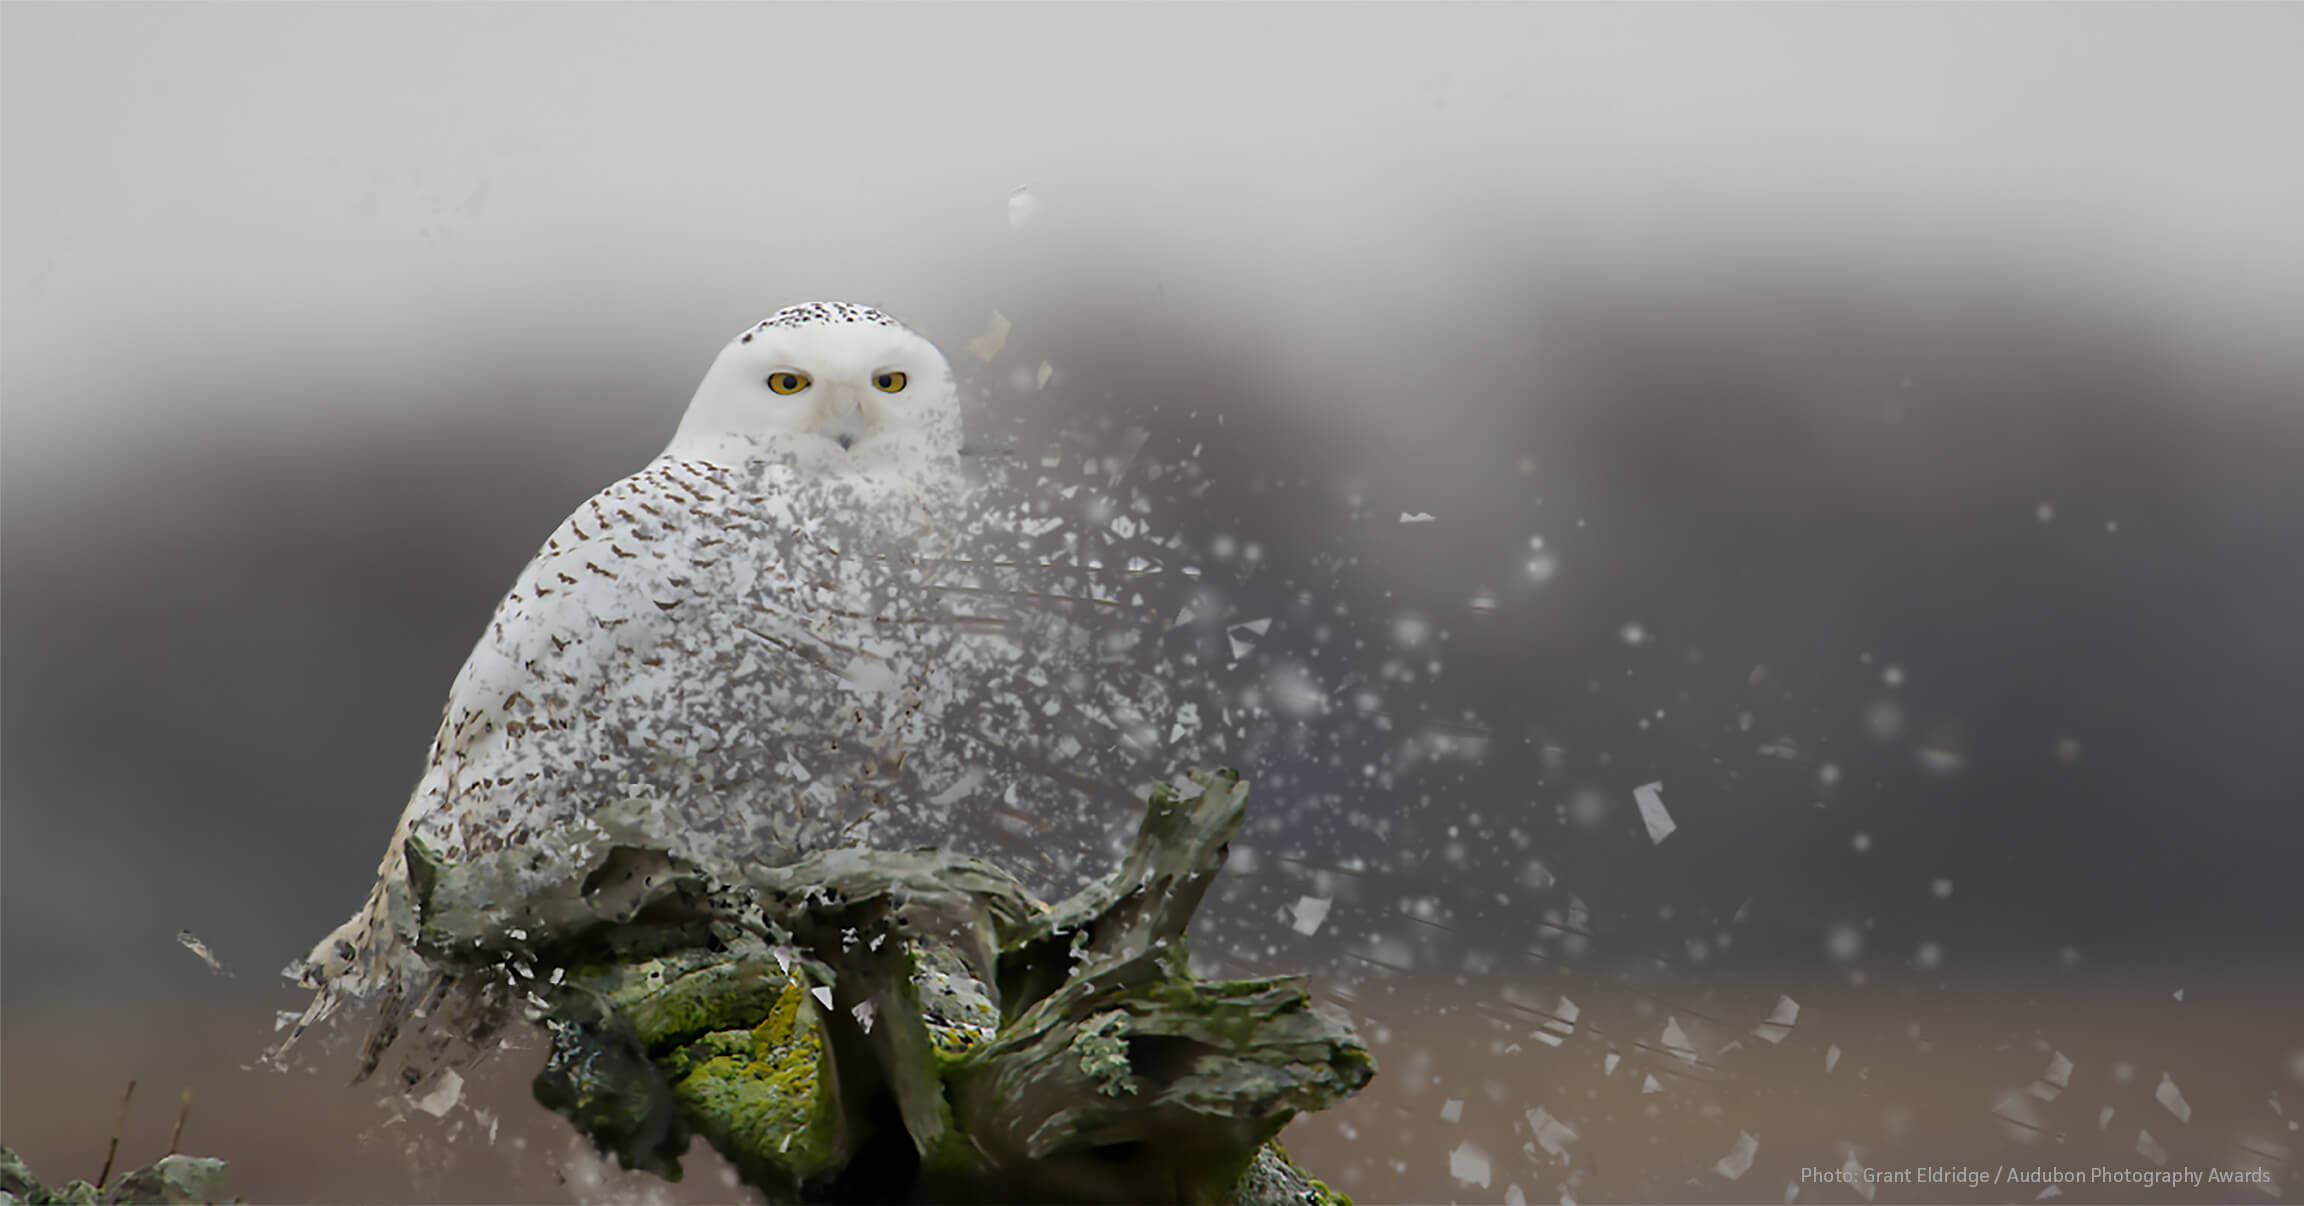  Snowy Owls are one of the species that are declining due to the current bird crisis. Photo by Grant Eldridge/Audubon Photography Awards